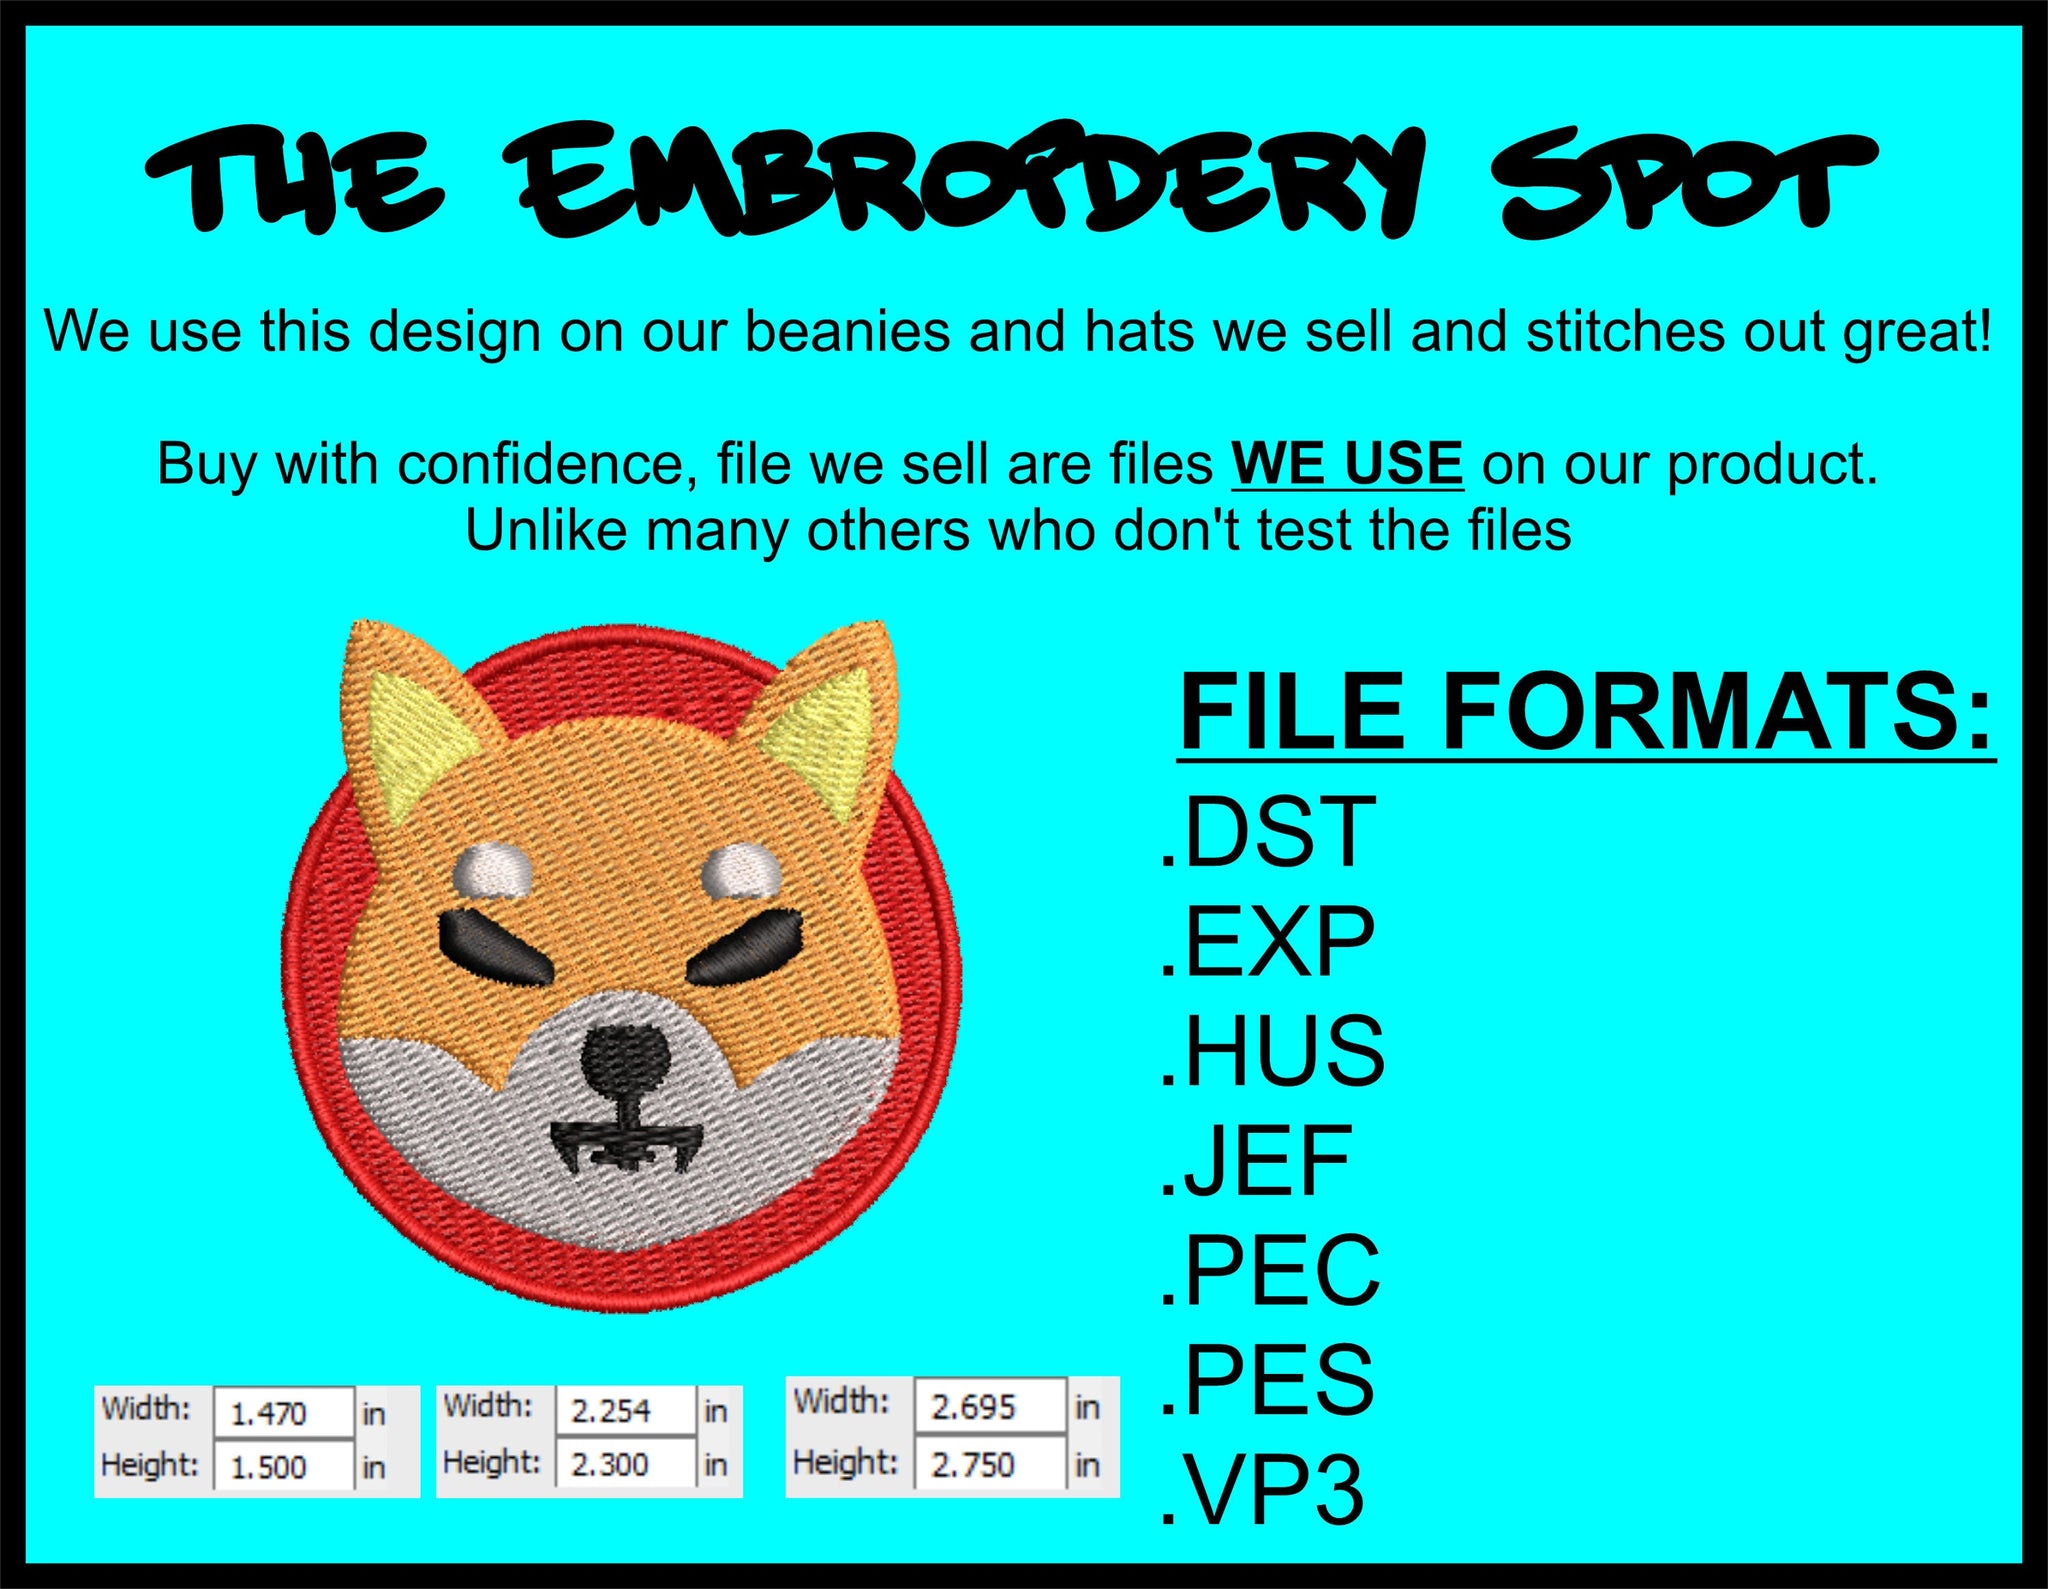 SHIB INU Machine Embroidery Design Files | Instant Download | 7 format files 3 sizes